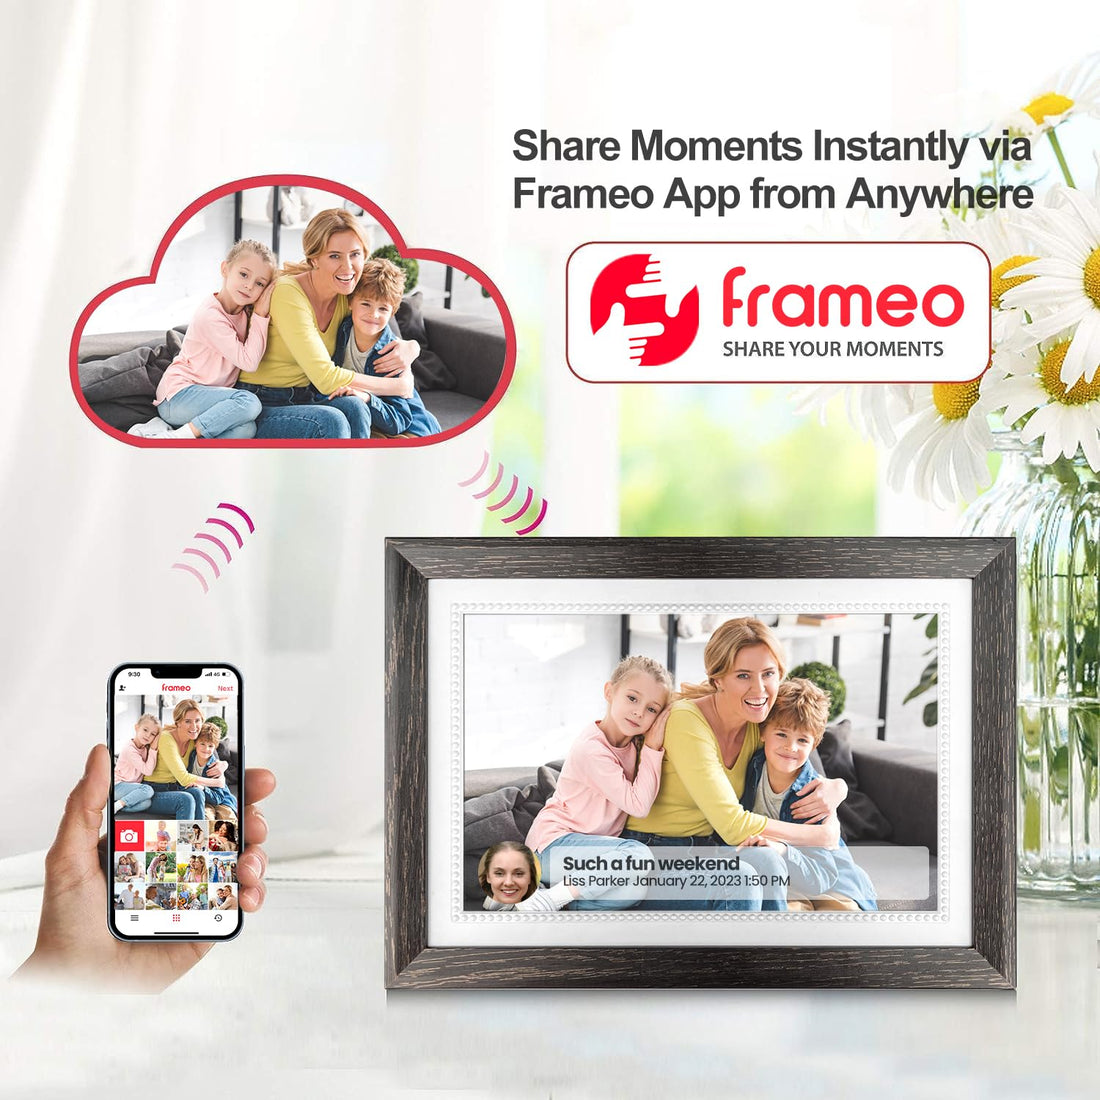 Frameo 10.1 Inch WiFi Digital Picture Frame Built-in 32GB Storage 1280 * 800 IPS HD Touch Screen Smart Electronic Digital Photo Frame Slideshow, Easy to Share Photos and Videos